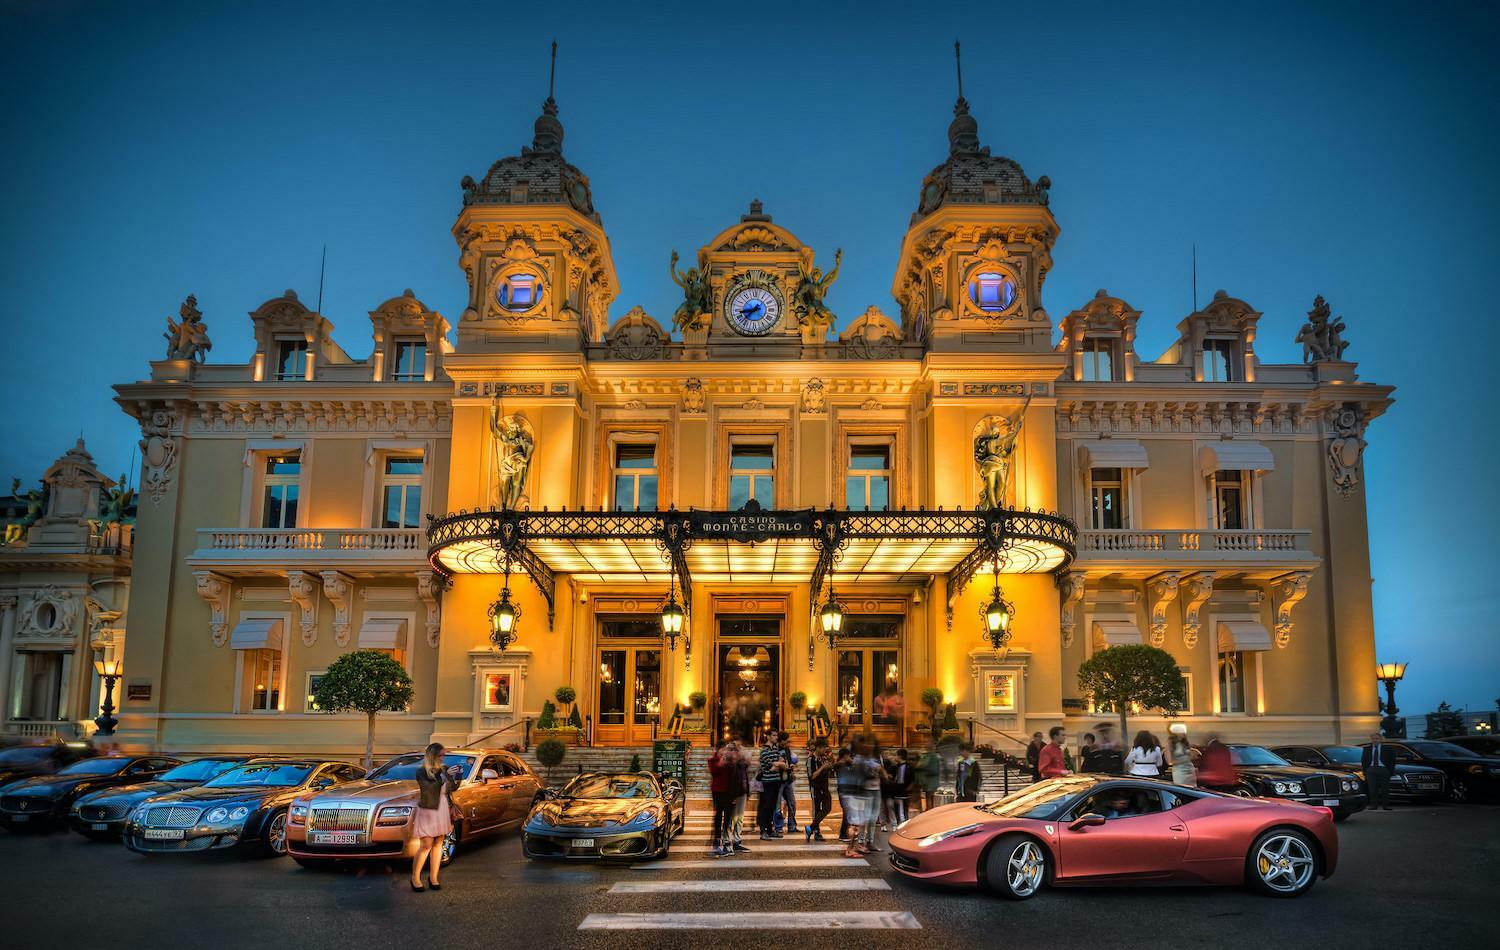 An outside view of luxurious Monte Carlo casino with a lot of luxurious cars